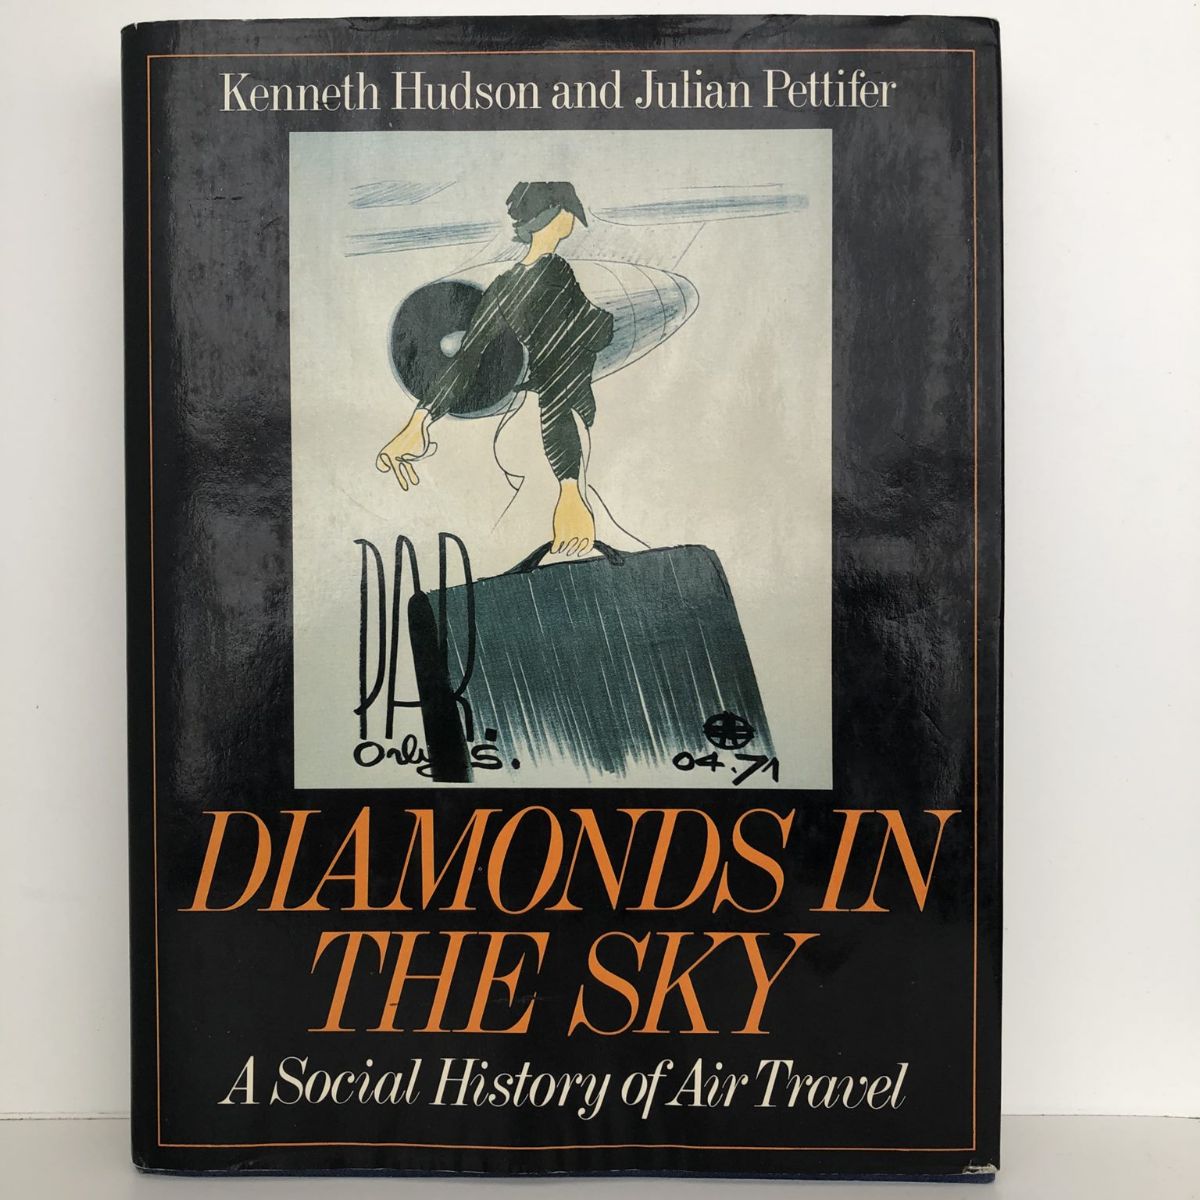 DIAMONDS IN THE SKY: A Social History of Air Travel